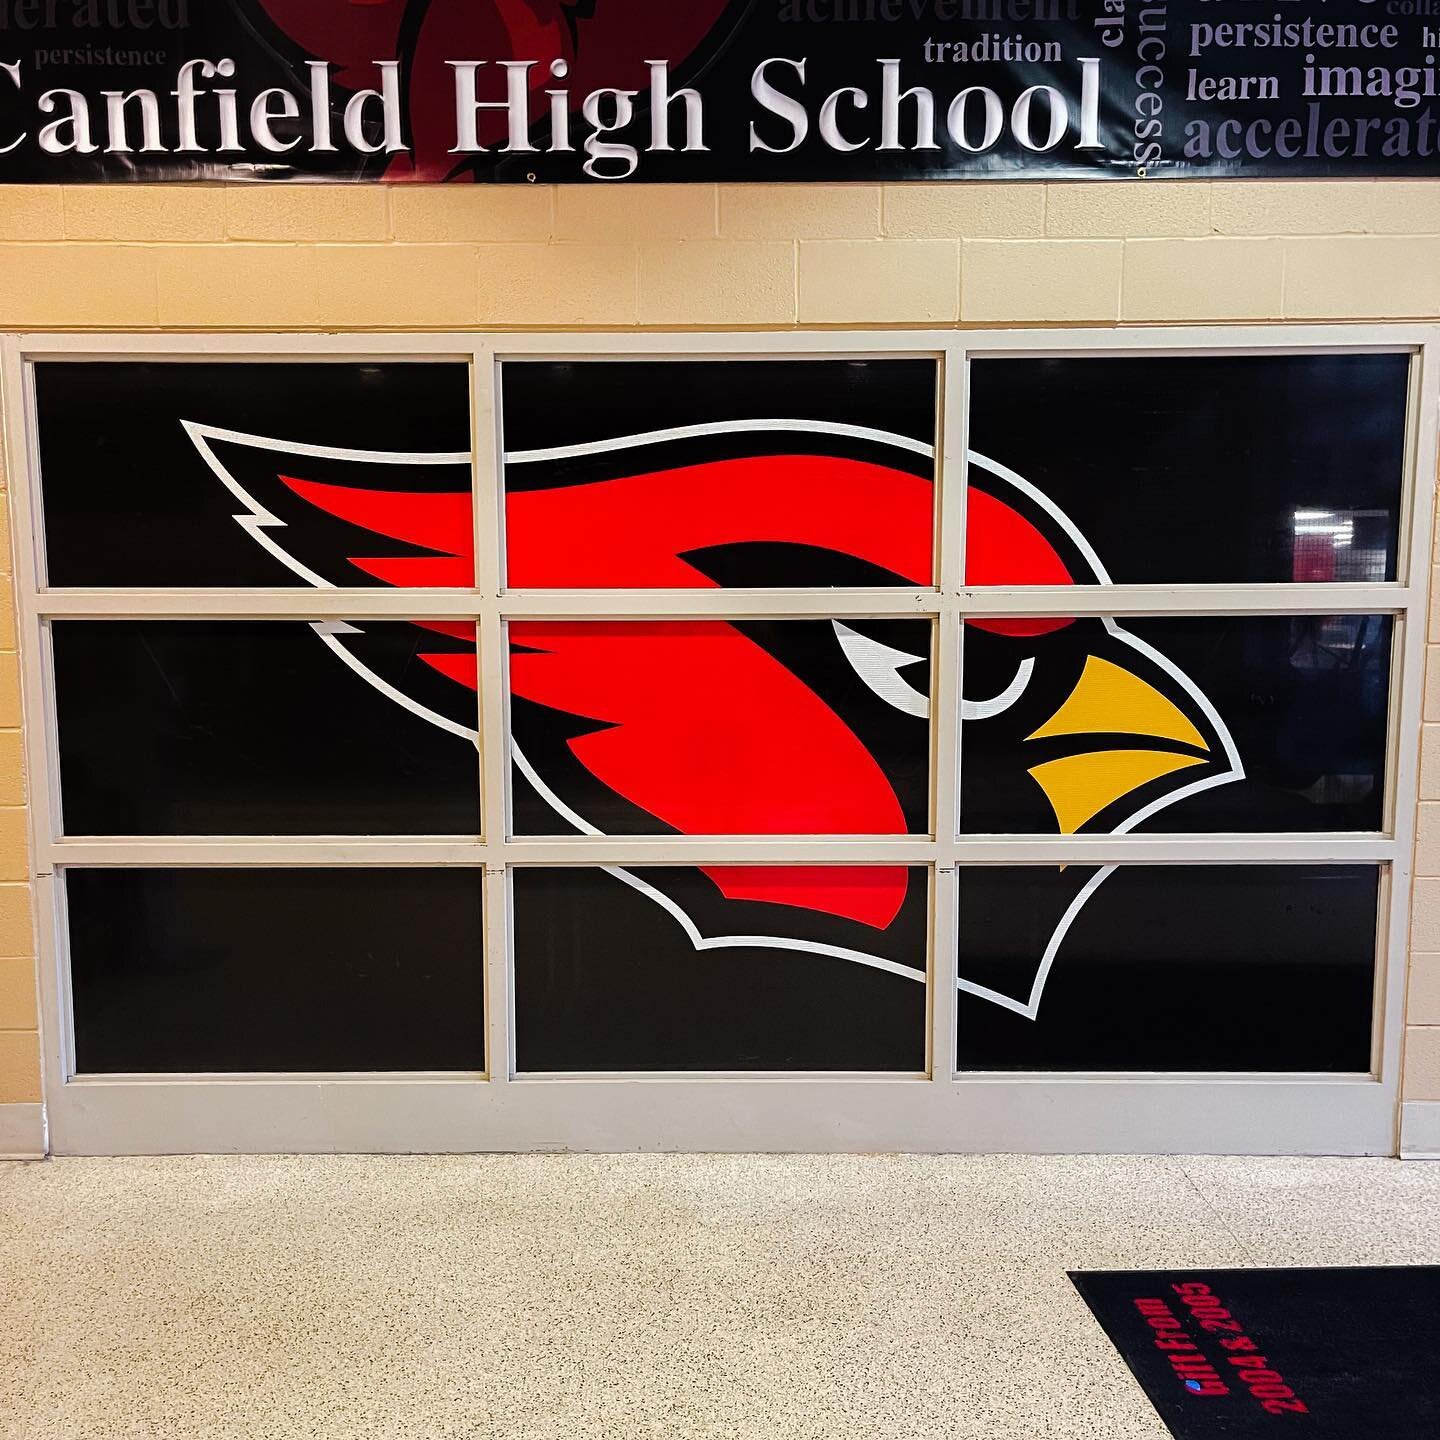 Interior perforated window graphics installed at Canfield High School today. Best of luck to all the Cardinal students headed back to school tomorrow! 🏫 #gocards